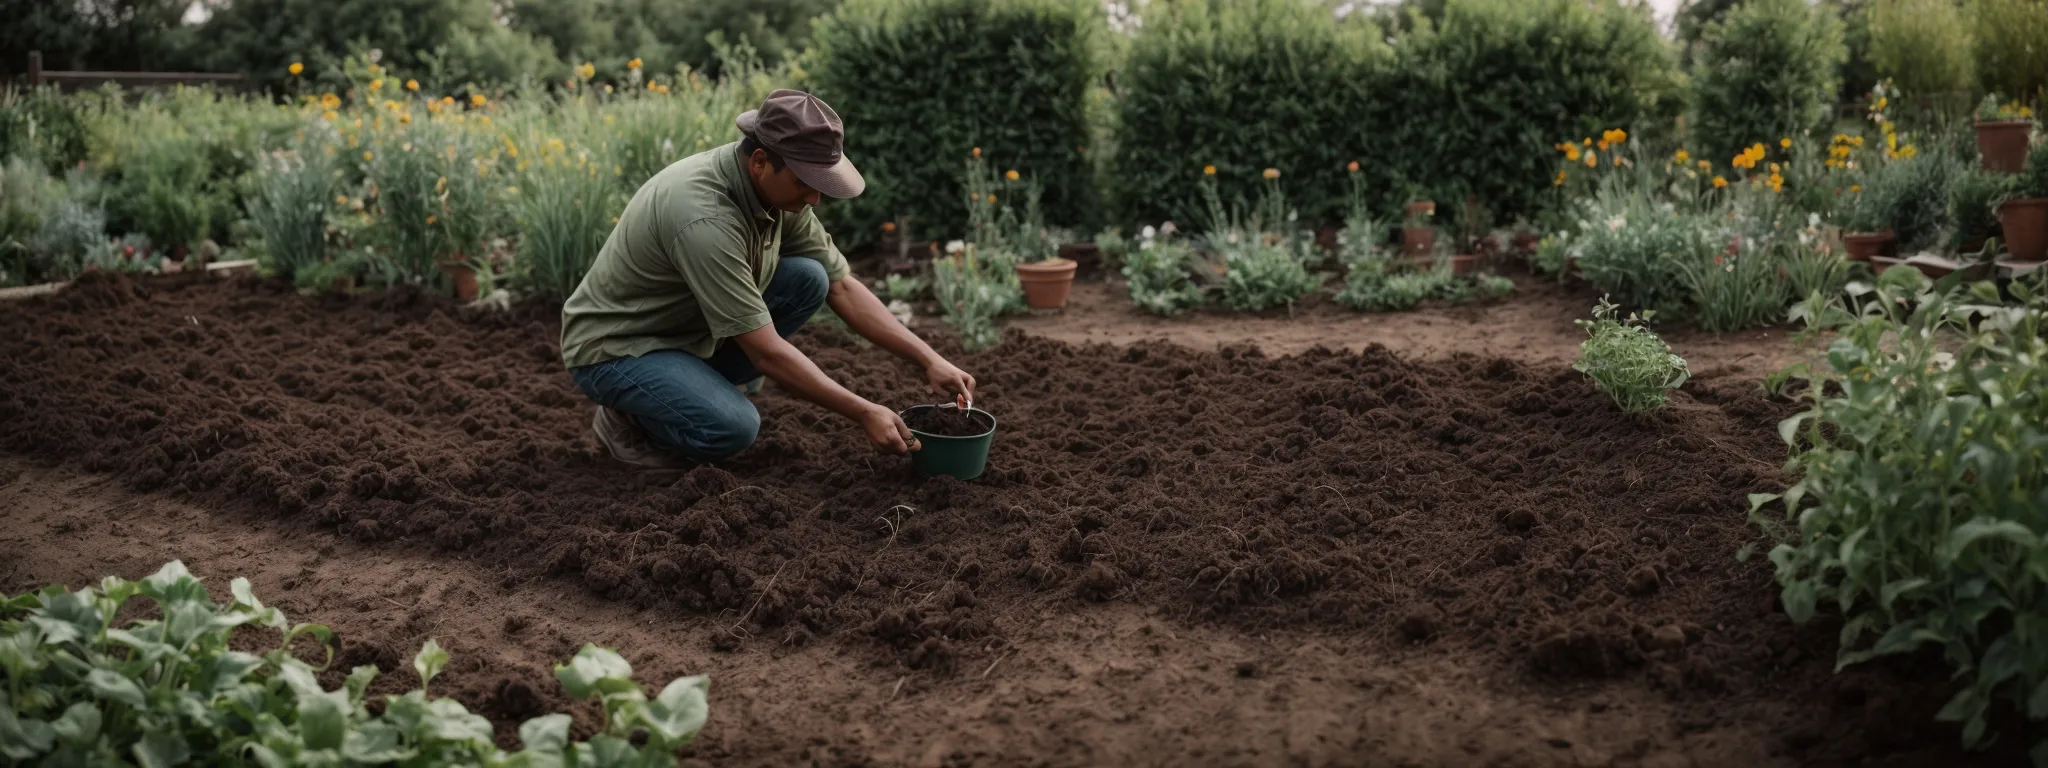 a gardener kneels on the ground, carefully planting seeds in a neatly tilled garden bed.